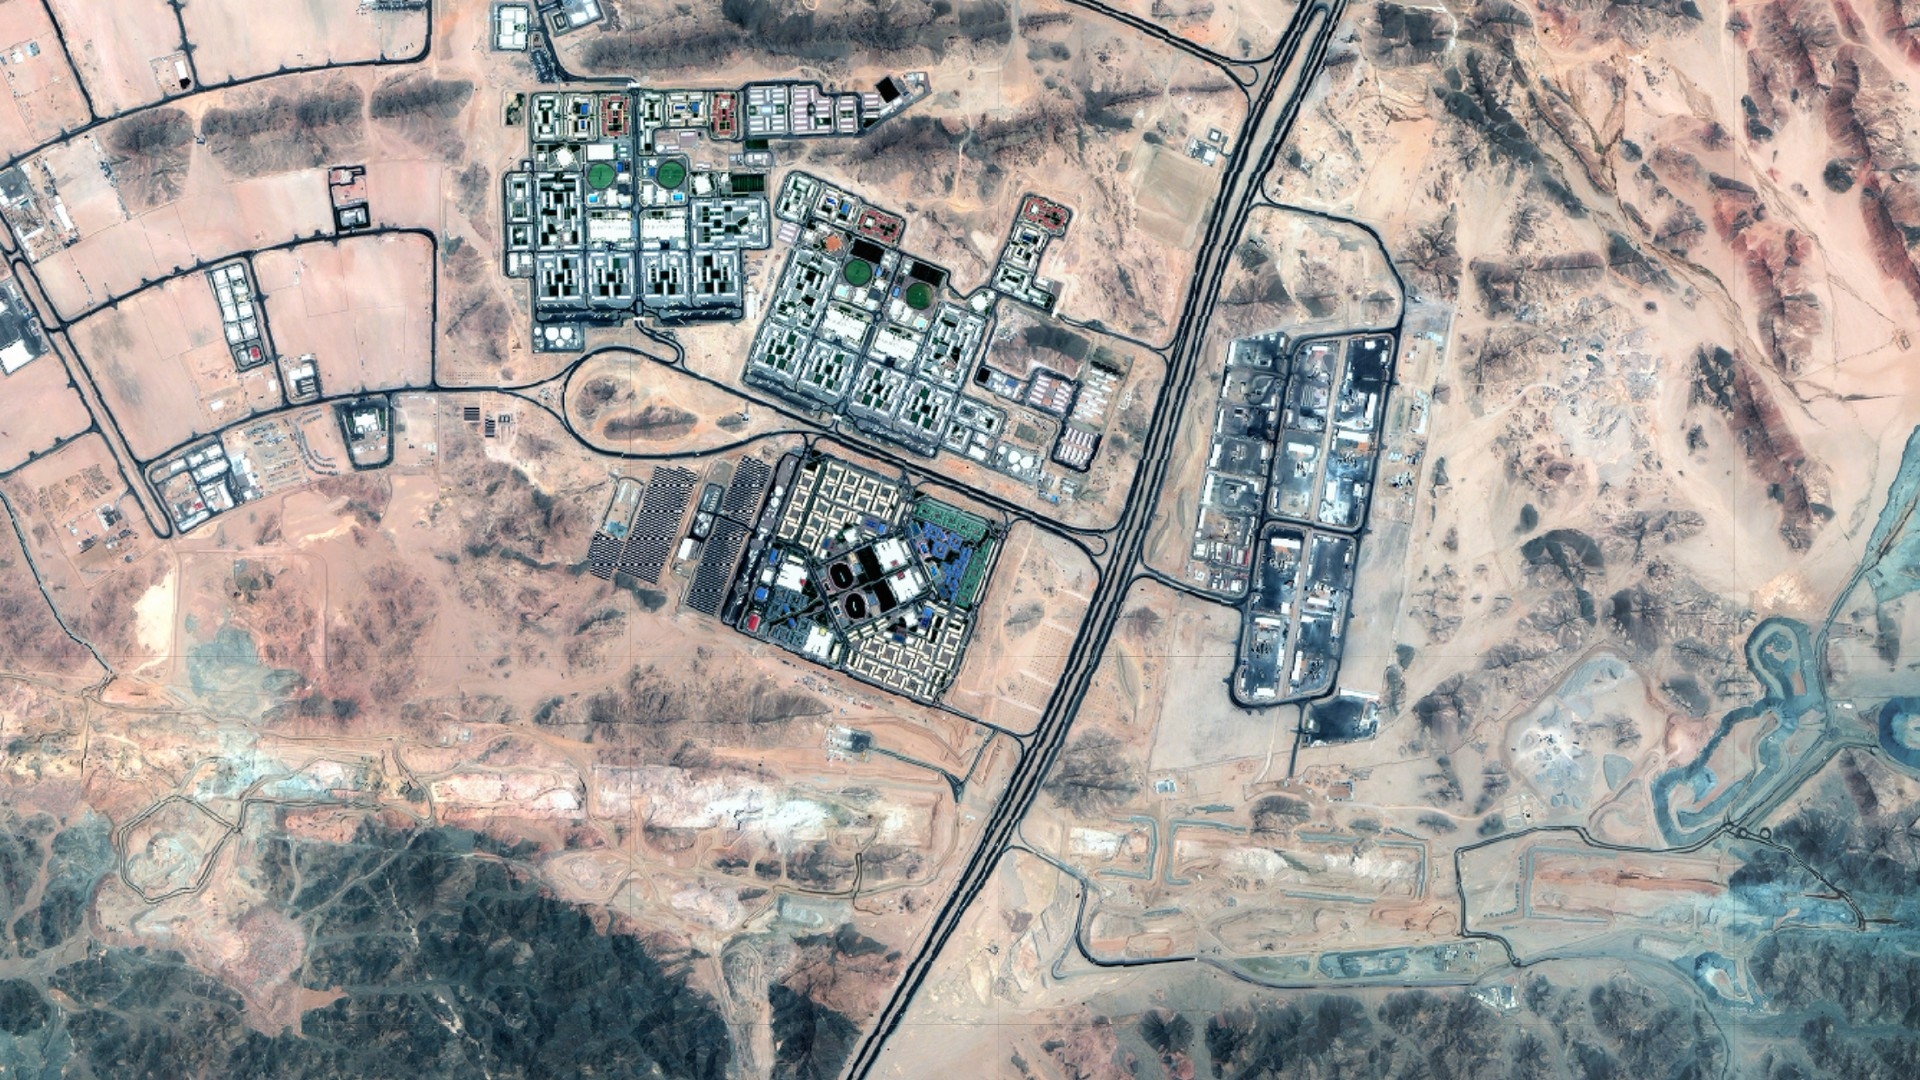 Satellite image taken in May 2023 shows construction of base village and excavation activity on 'The Line' in Saudi Arabia's northwestern Tabuk province (CG Satellite/Soar)